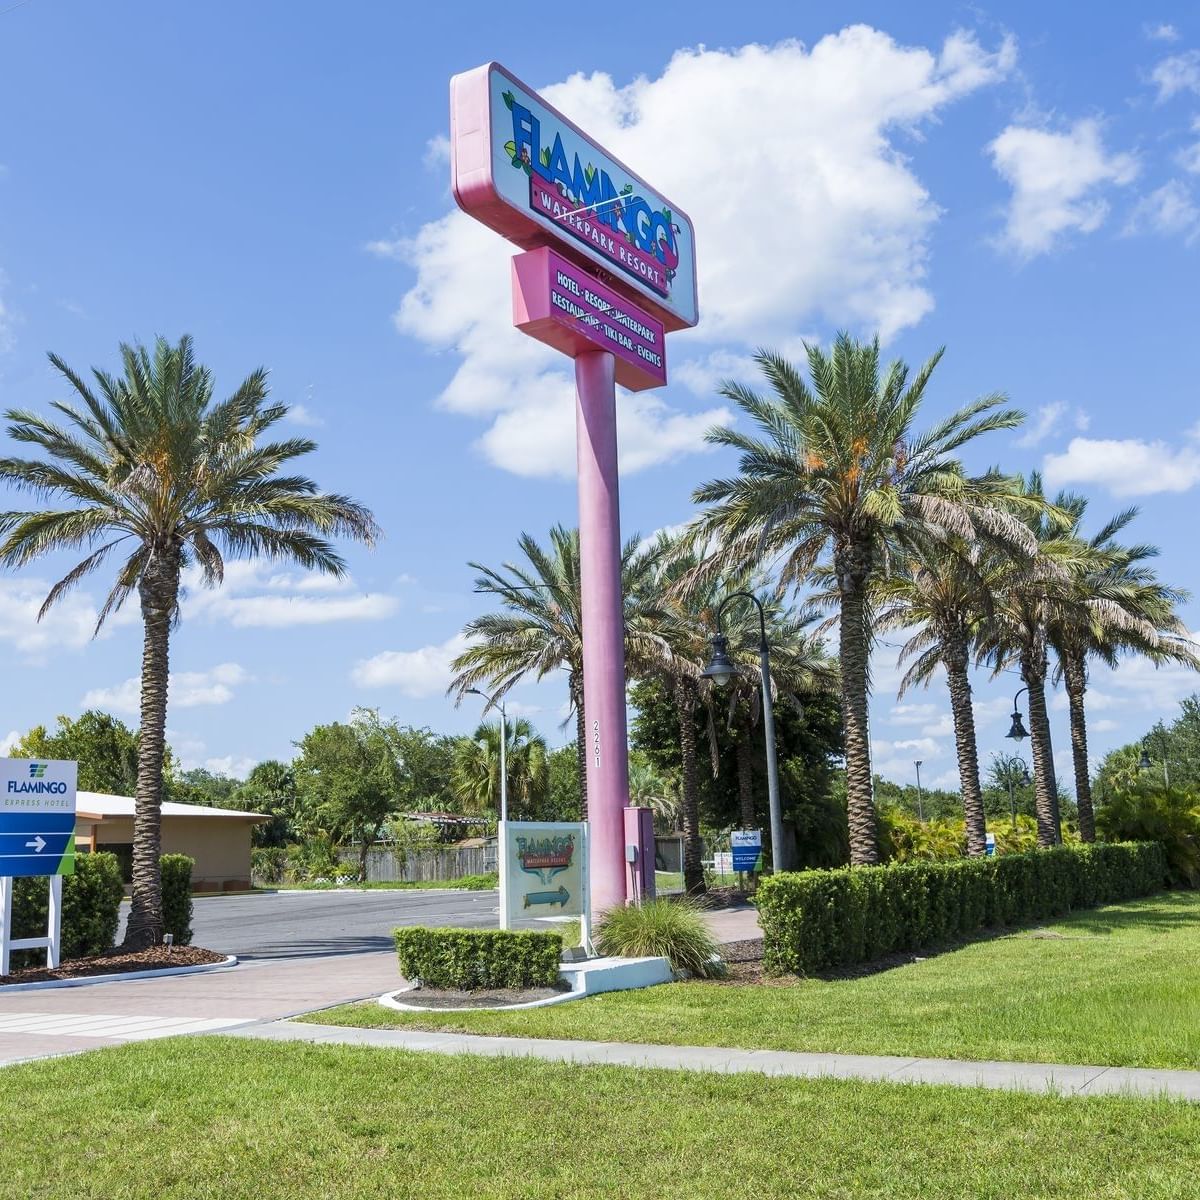 Exterior view of the entrance to Flamingo Express Hotel